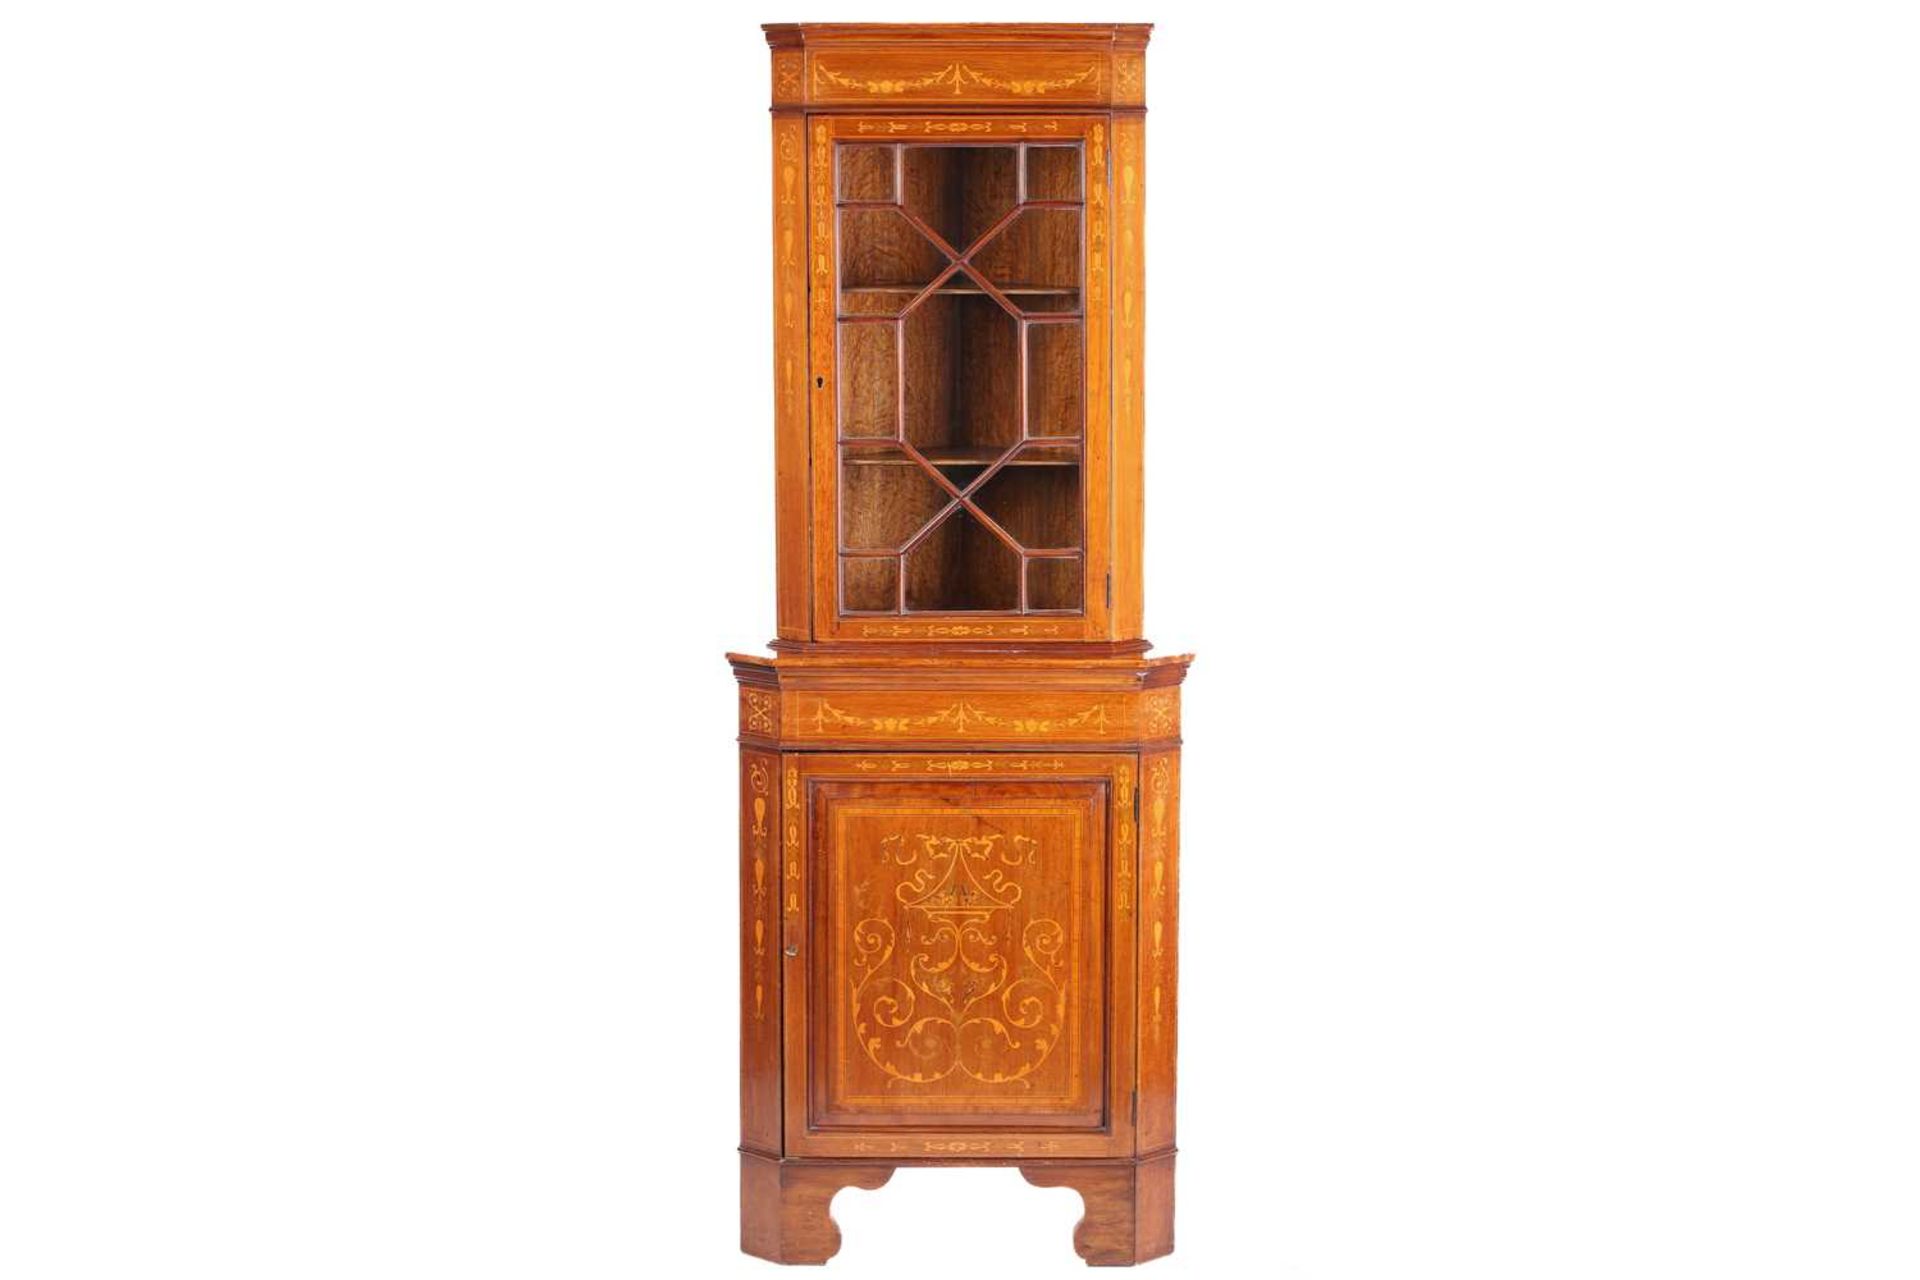 An Edwardian mahogany and Neo-Classical marquetry inlaid freestanding corner display cabinet, in the - Image 2 of 15